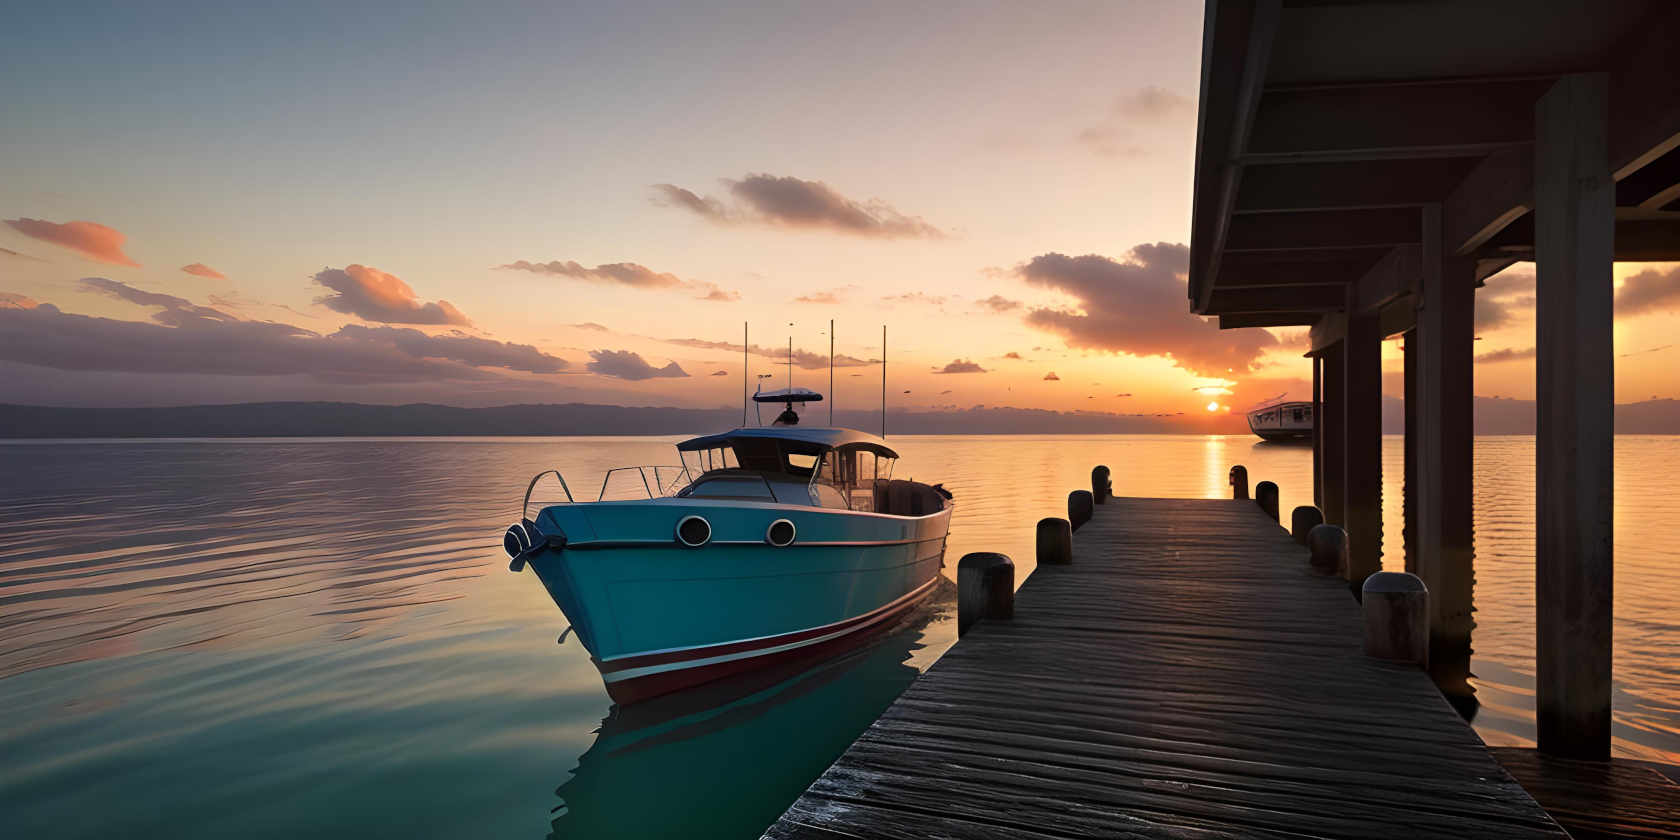 A cabin cruiser docked next to a pier at sunrise